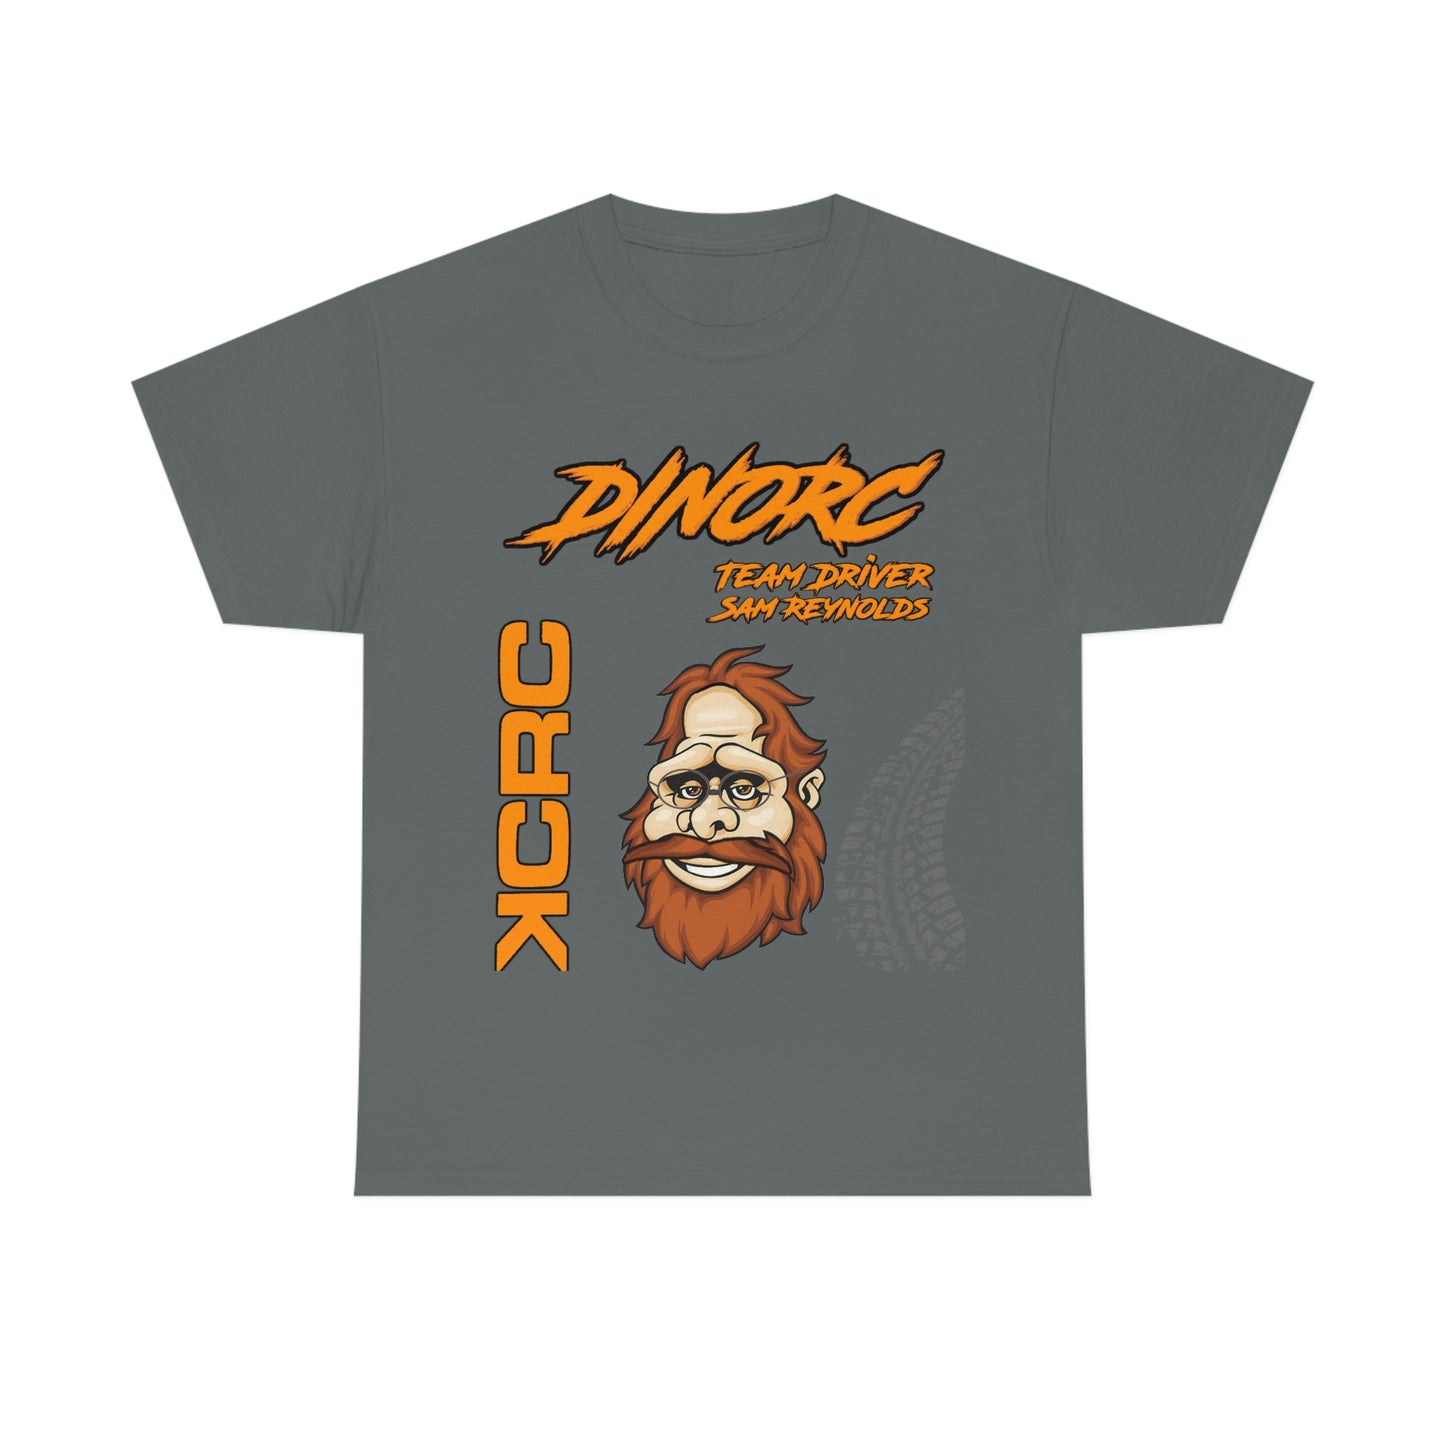 Team Driver Sam Reynolds Front and Back DinoRc Logo T-Shirt S-5x 5 colors